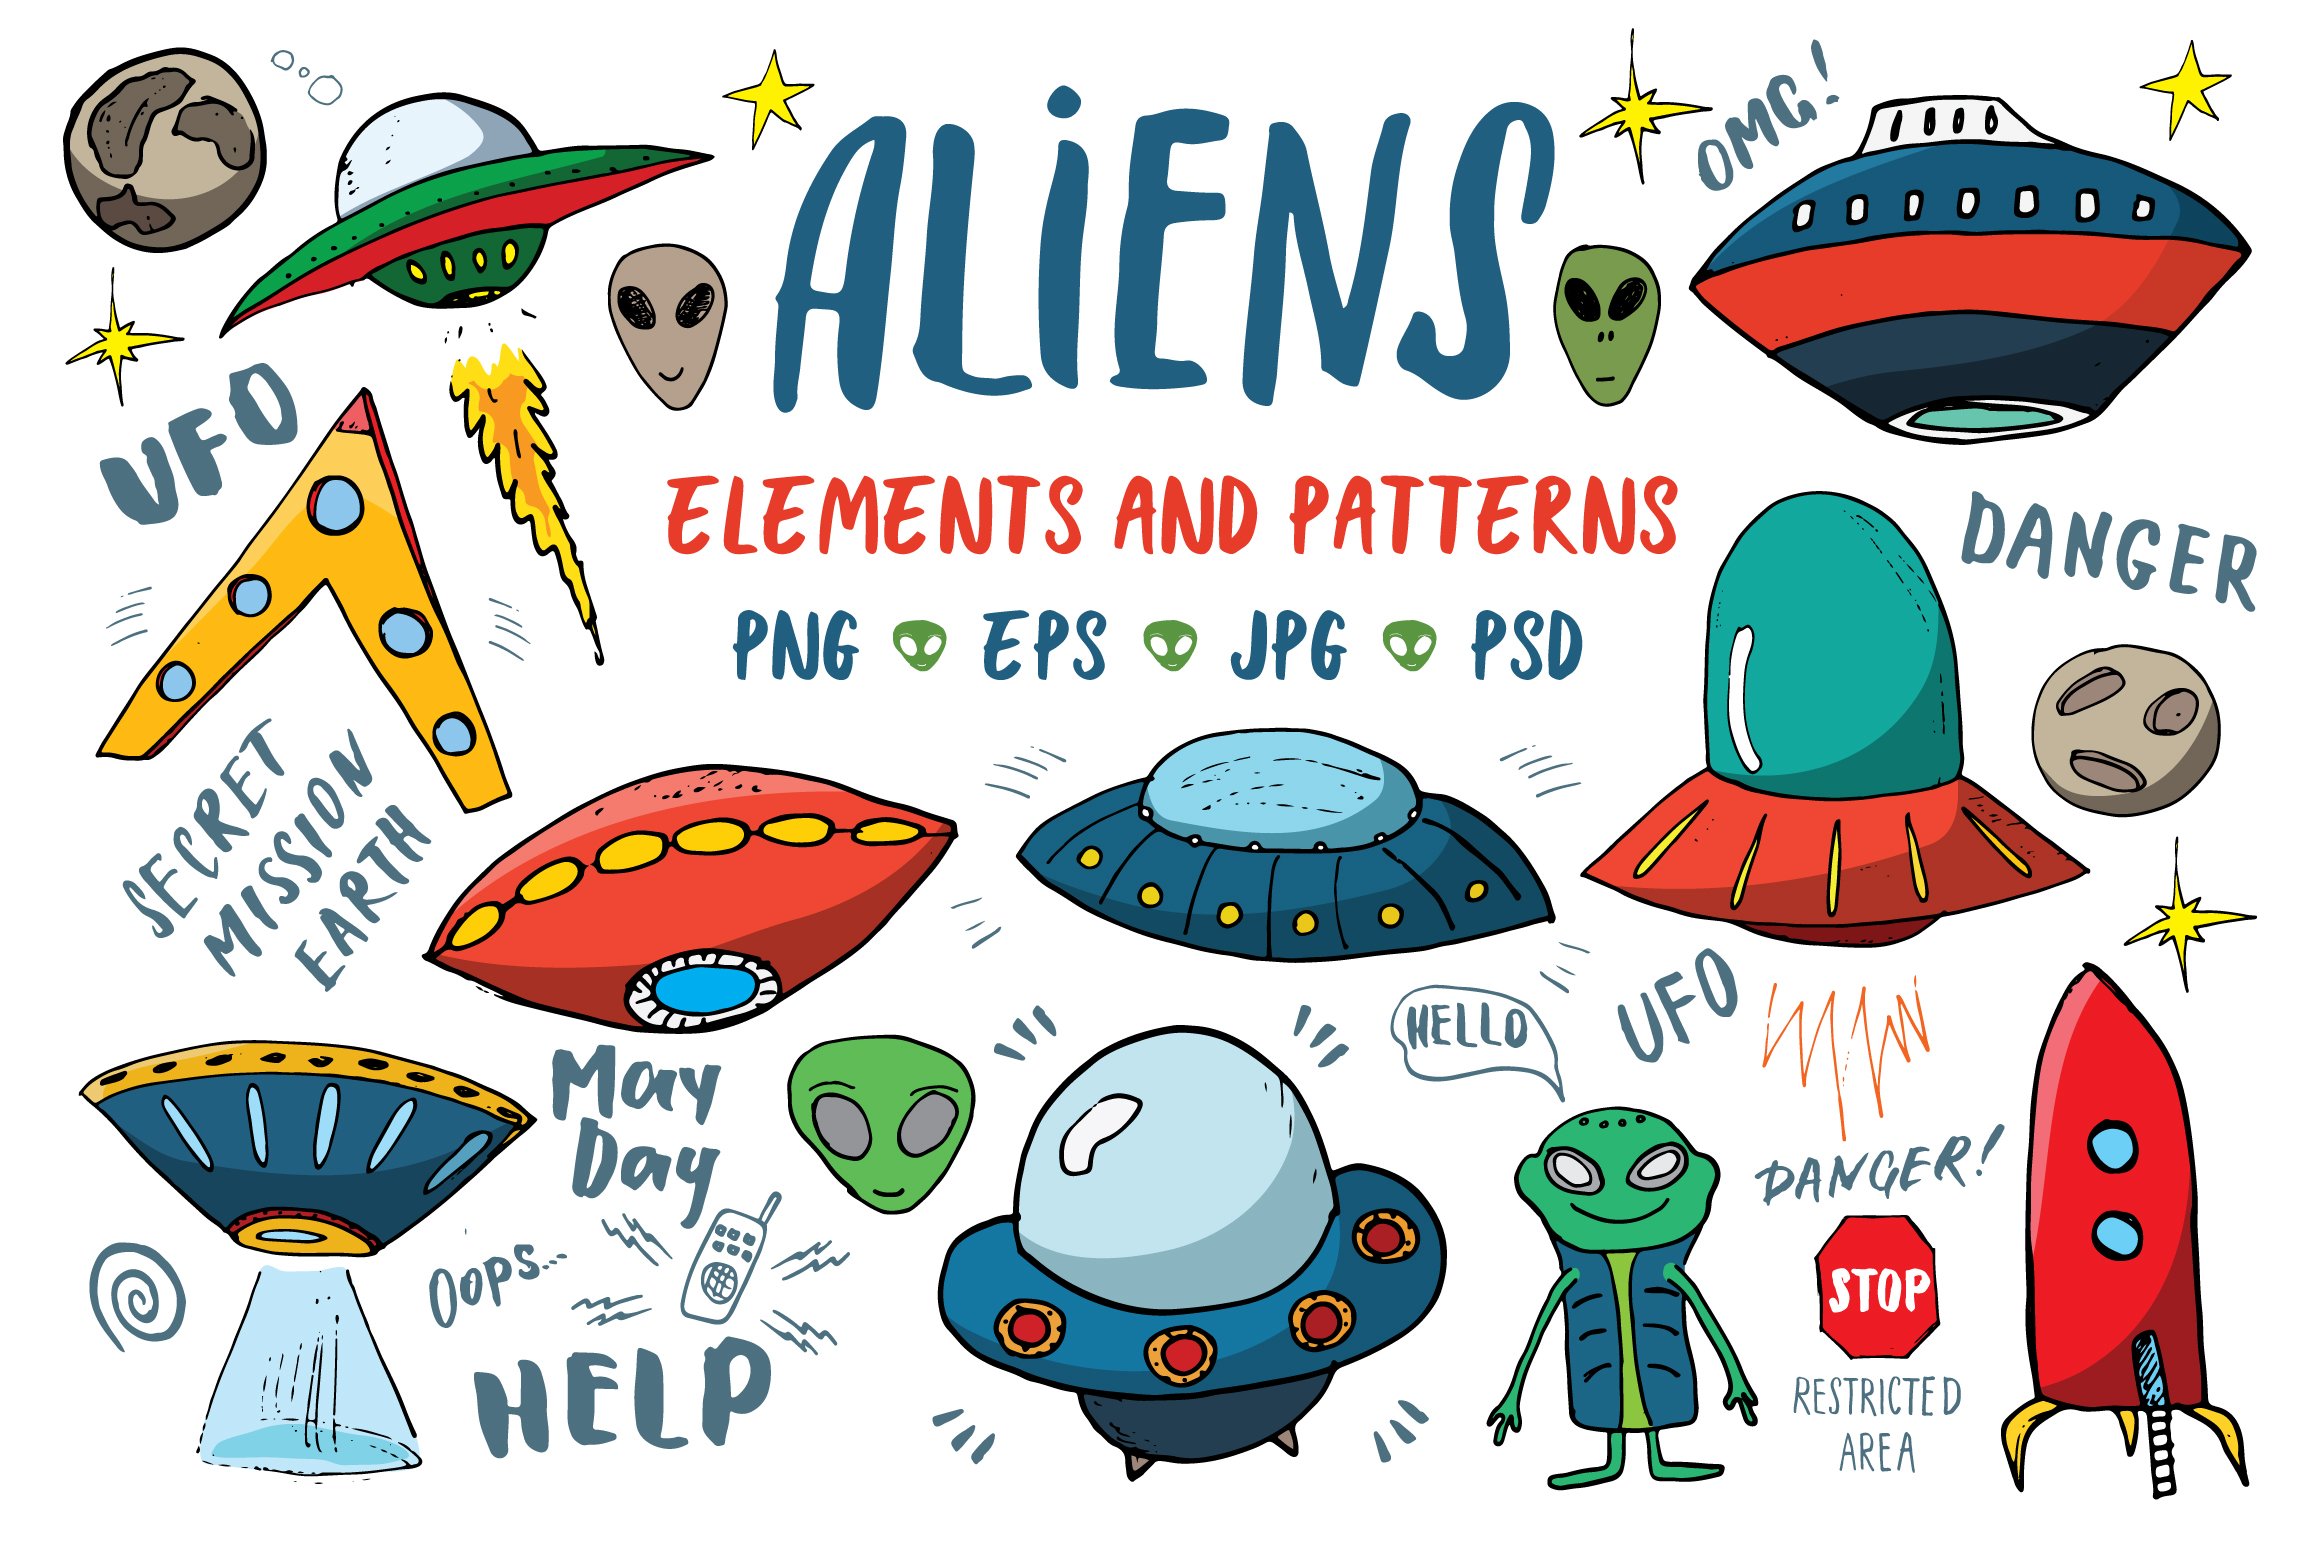 Aliens and UFO Set and patterns cover image.